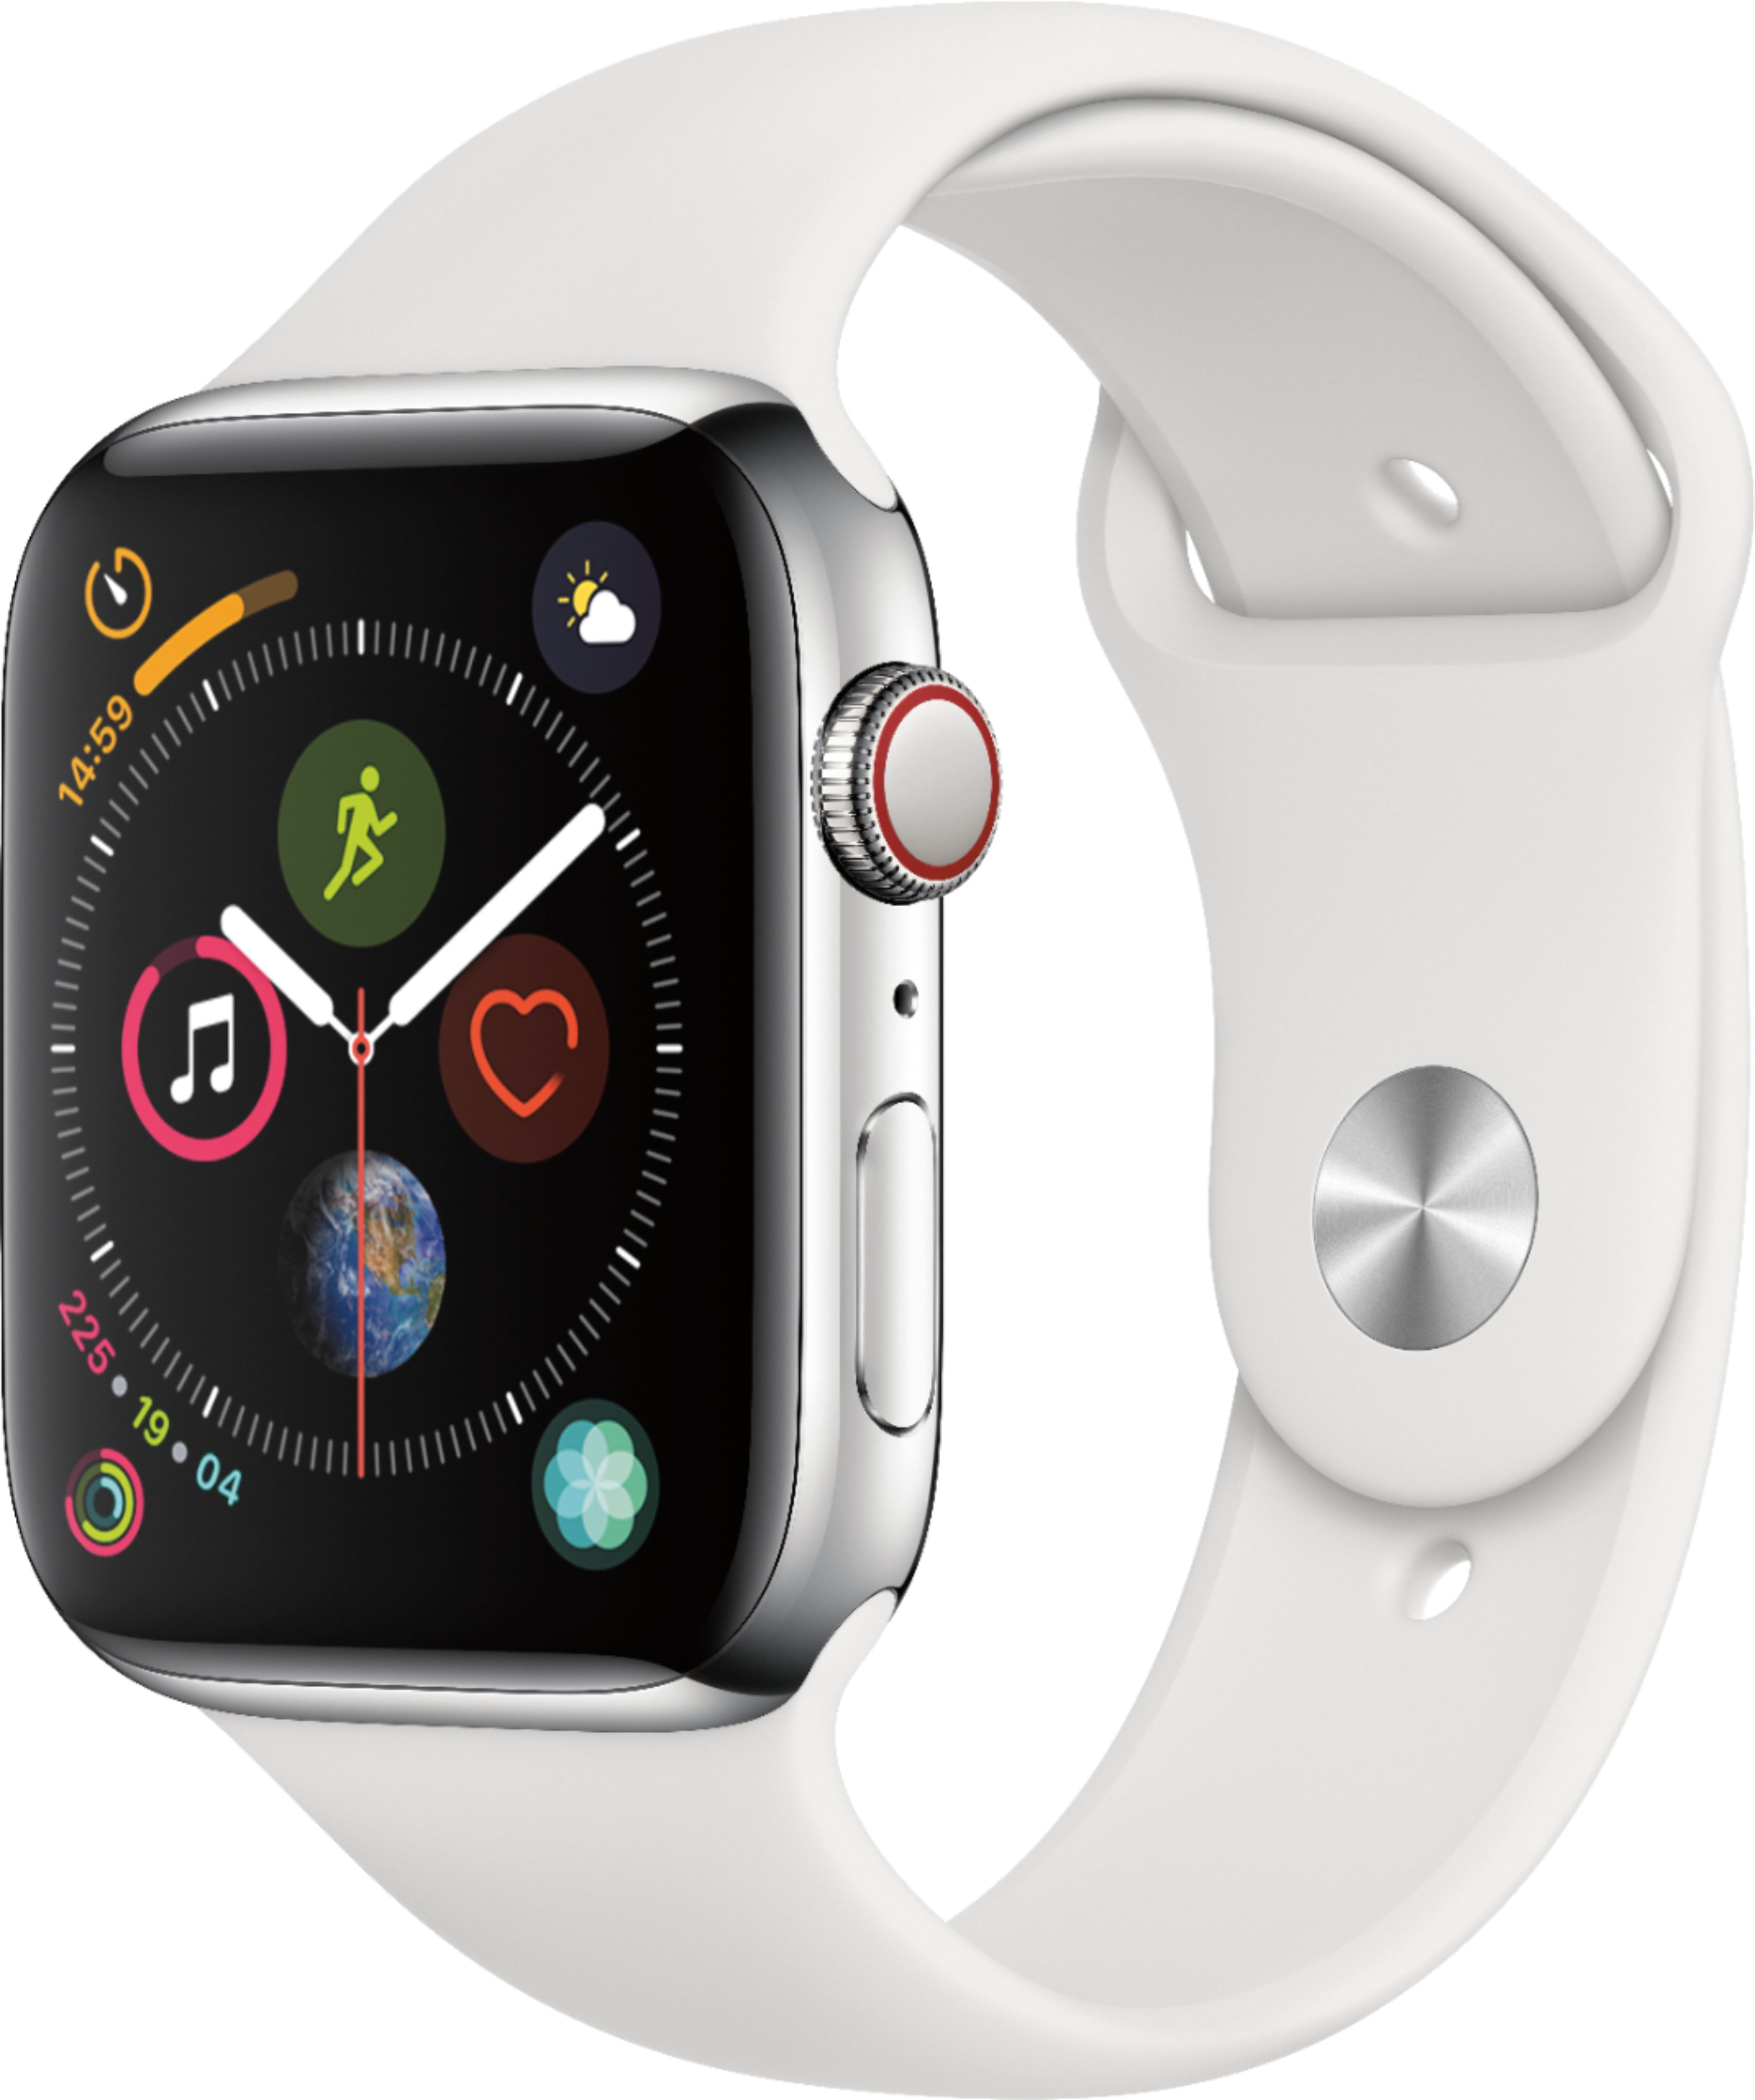 Geek Squad Certified Refurbished Apple Watch Series 4 (GPS + Cellular) 44mm Stainless Steel Case with White Sport Band - Stainless Steel